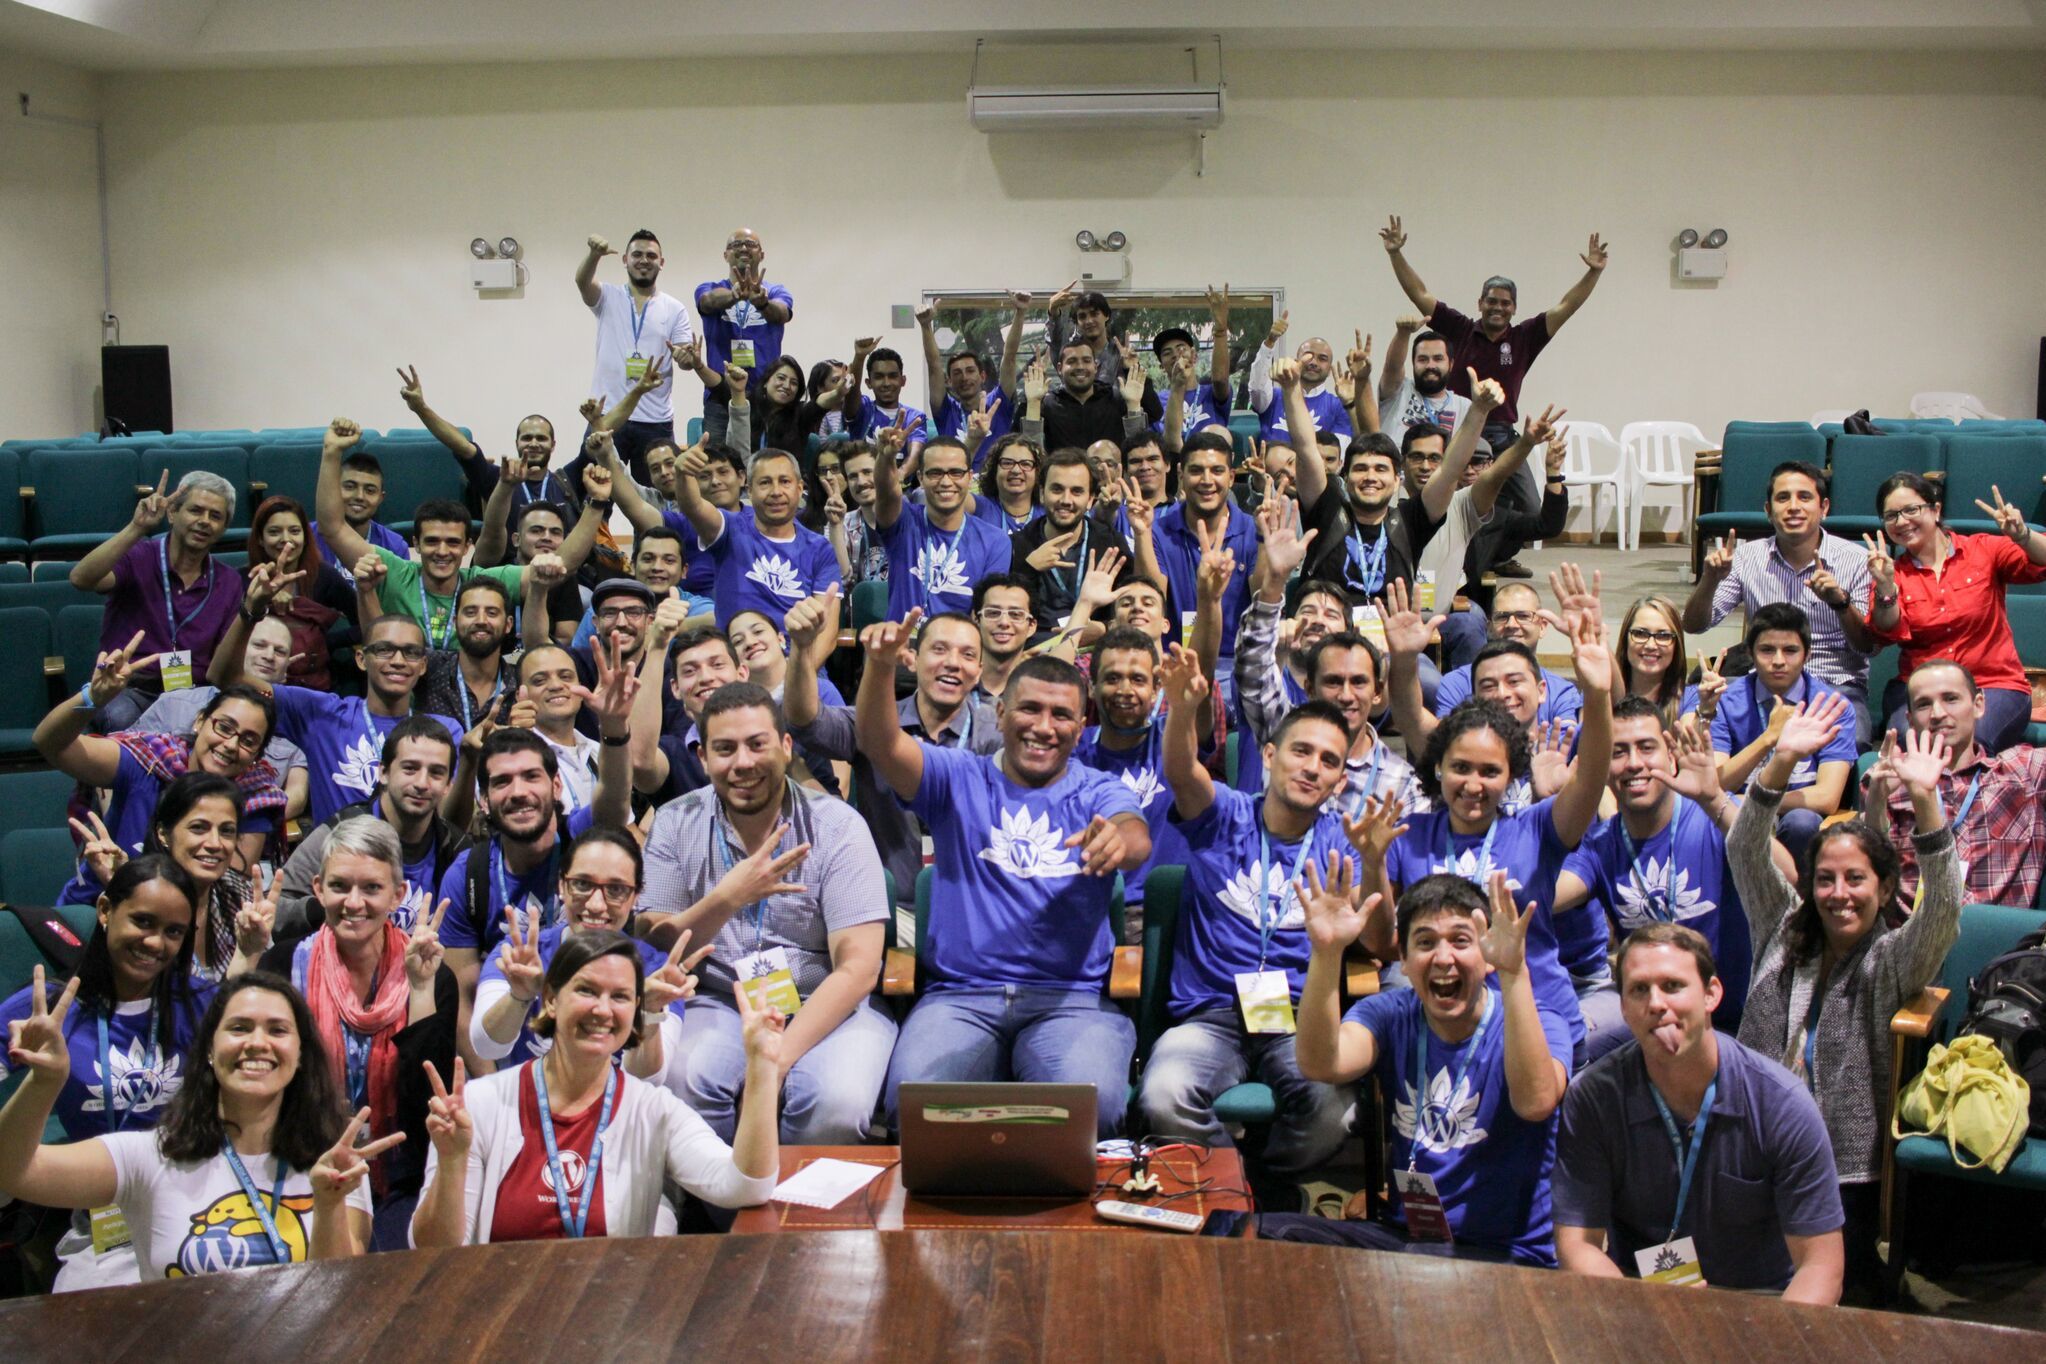 WordCamp Medellin 2016. Photo by Samantha Hare.